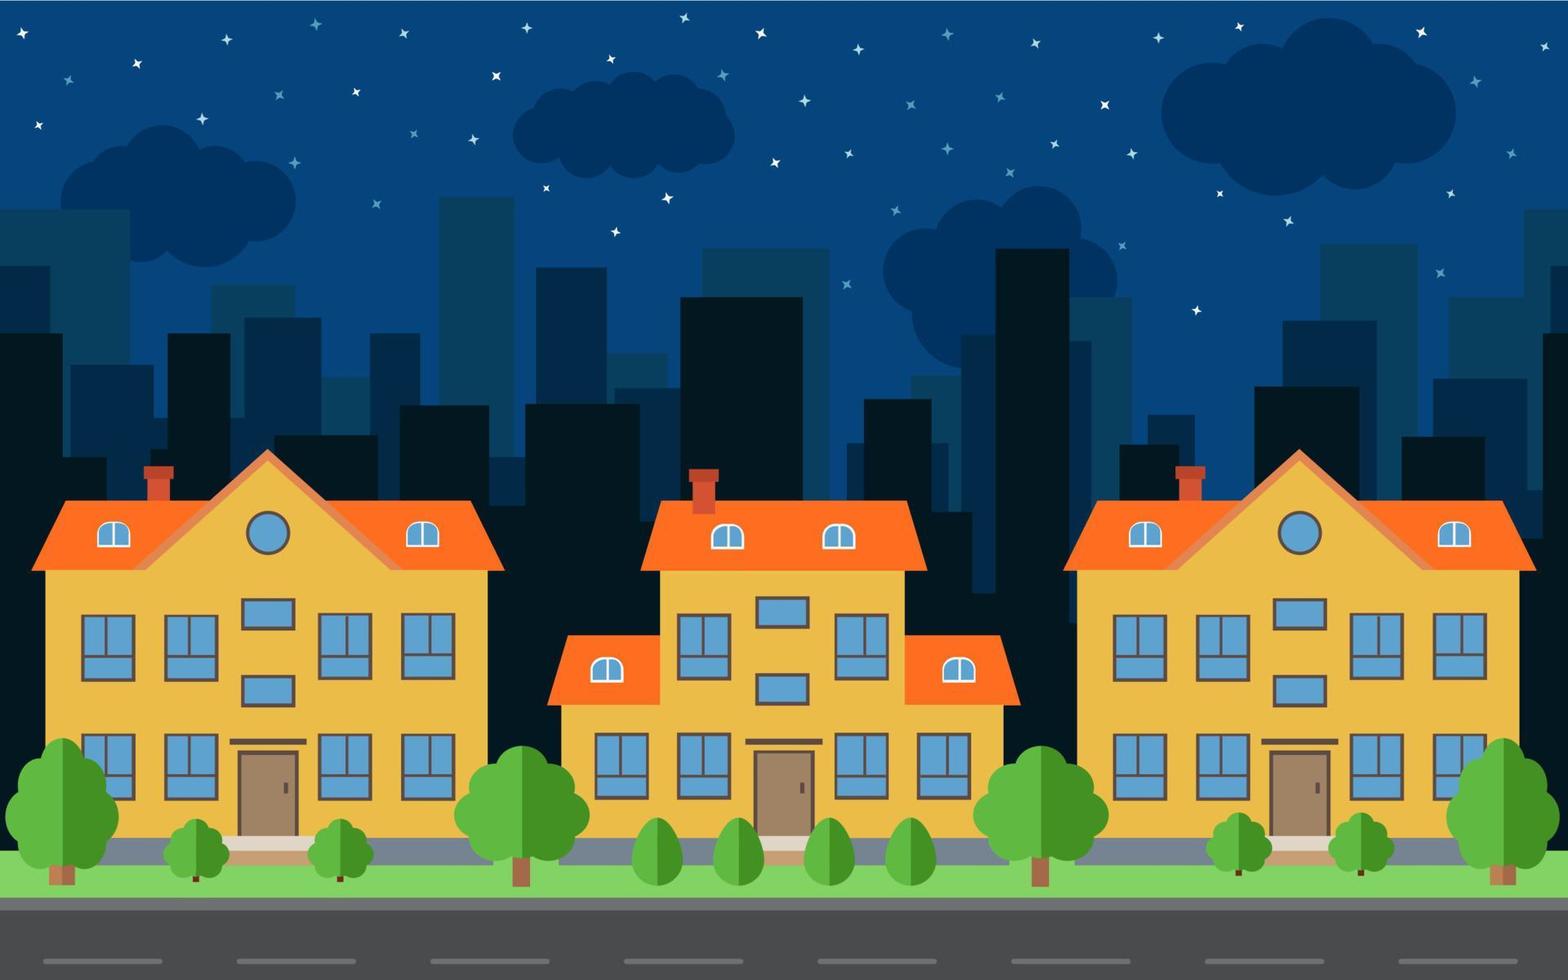 Vector night city with cartoon houses and buildings. City space with road on flat style background concept. Summer urban landscape. Street view with cityscape on a background